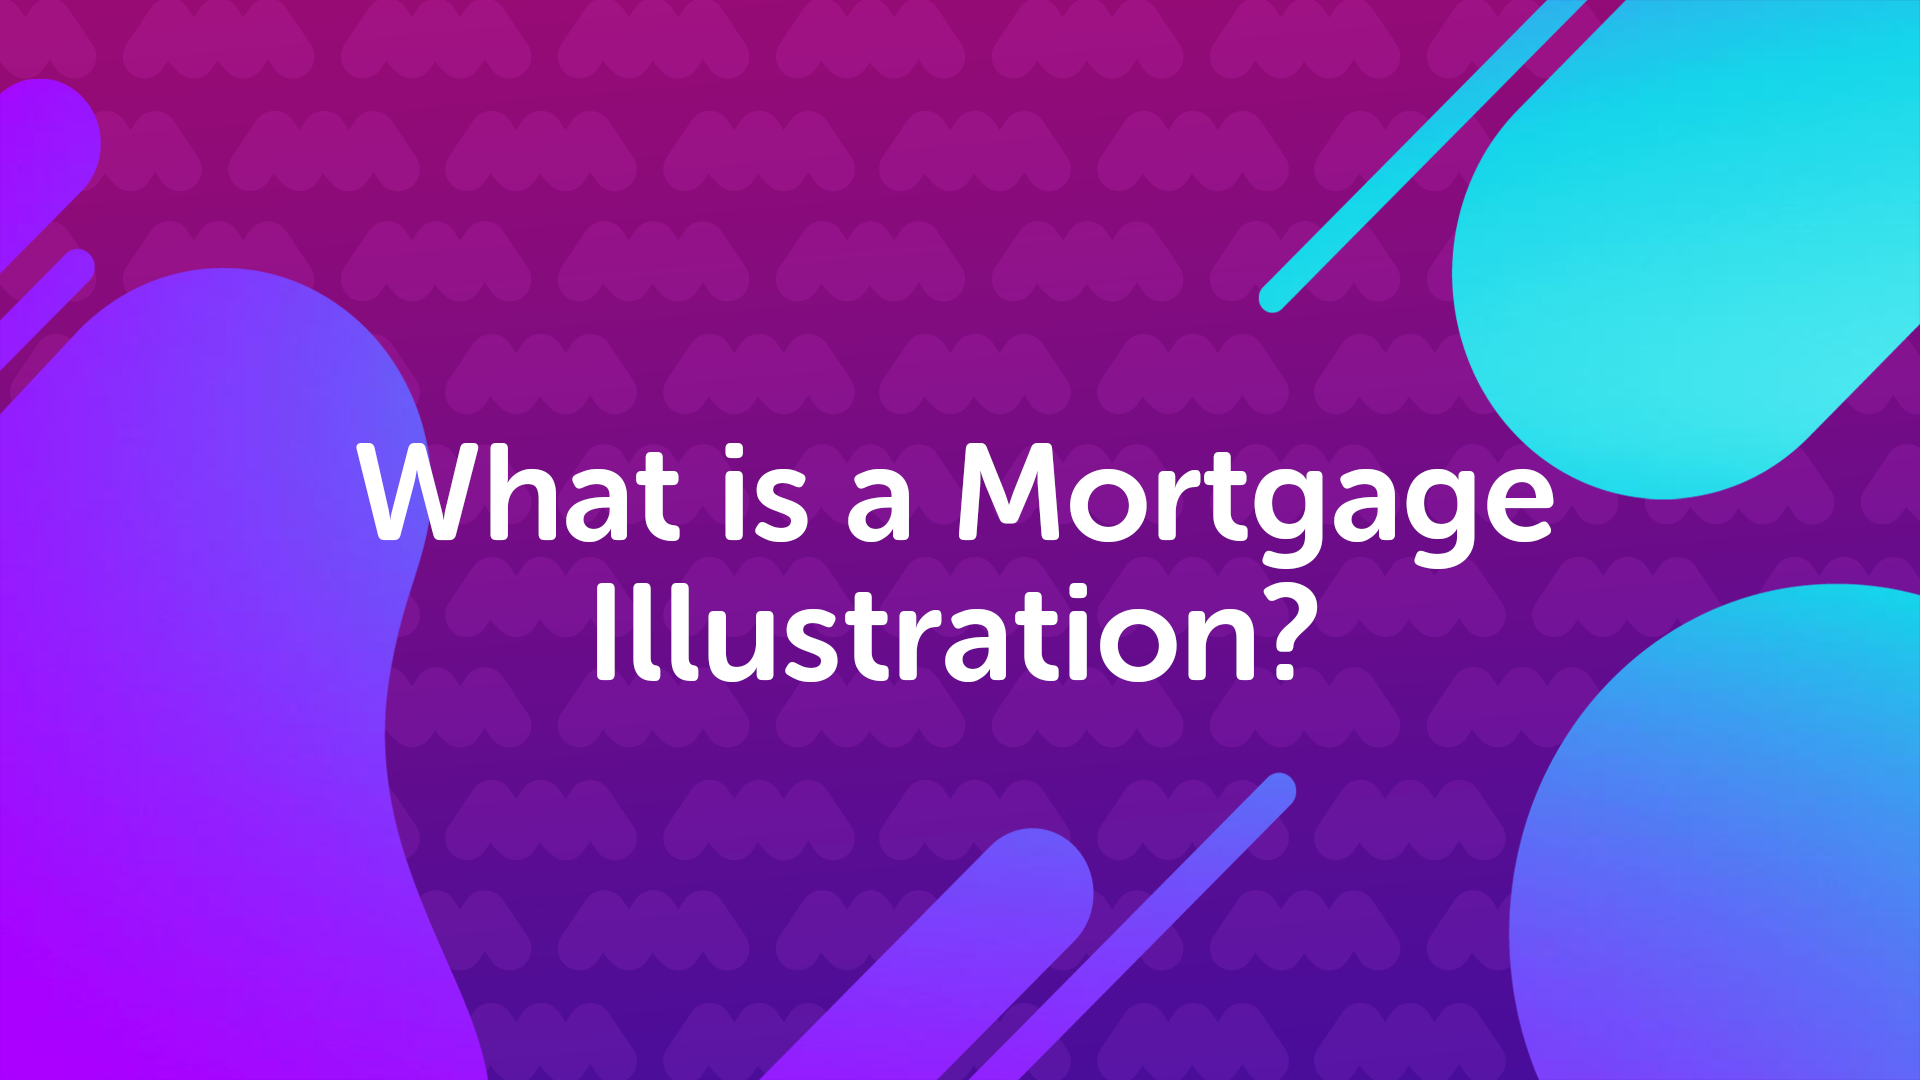 Mortgage Illustration in Manchester